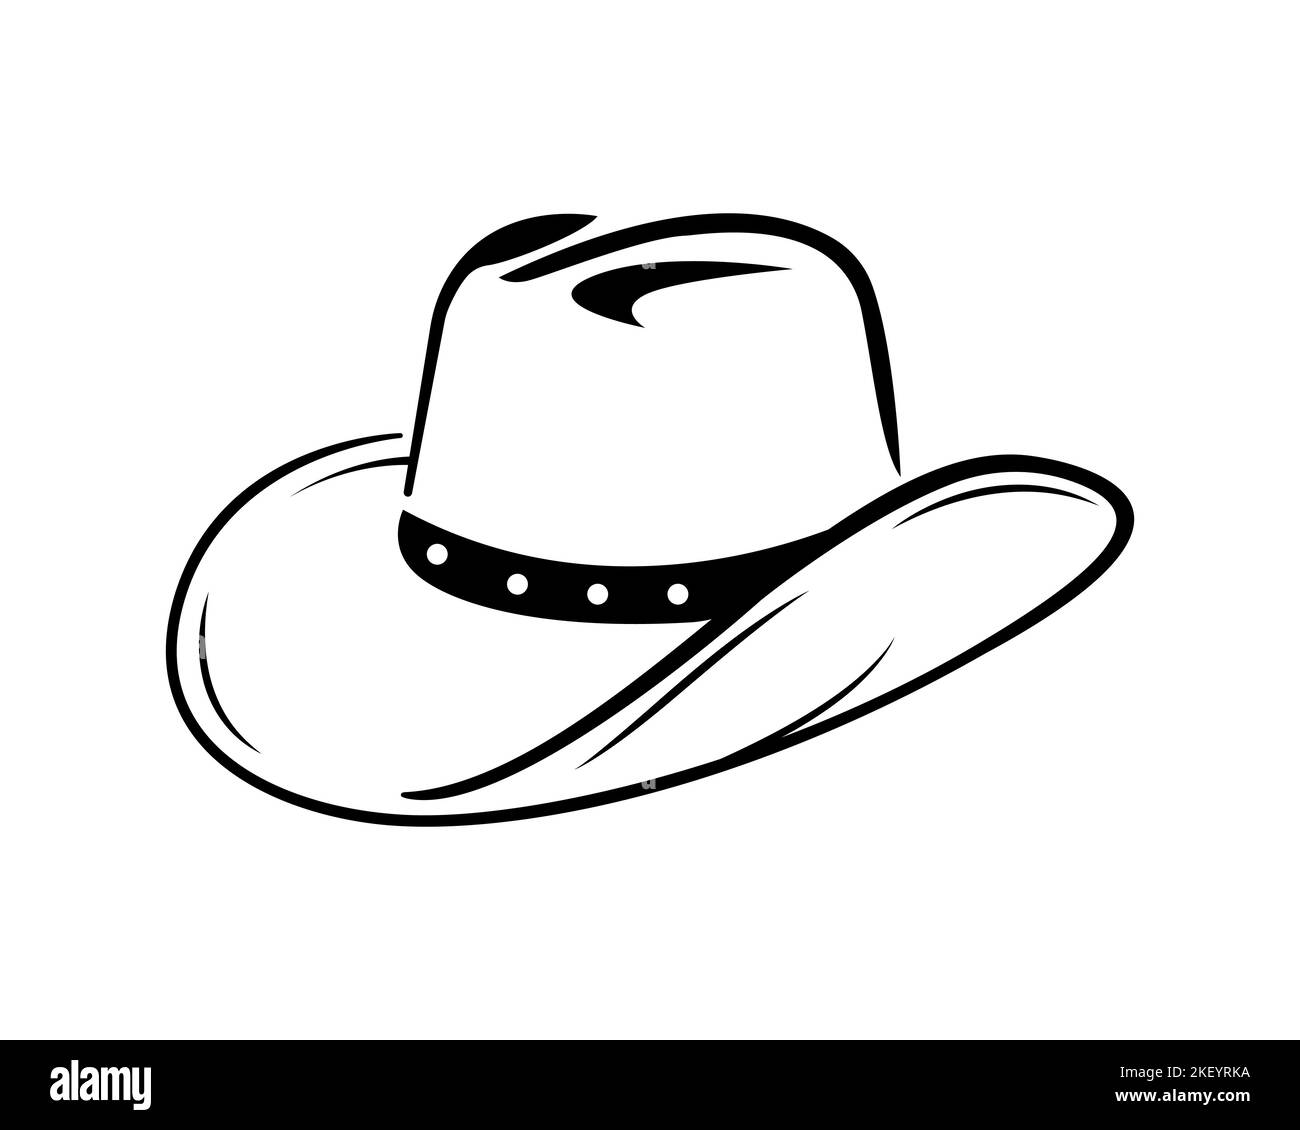 Space cowboy Black and White Stock Photos & Images - Alamy